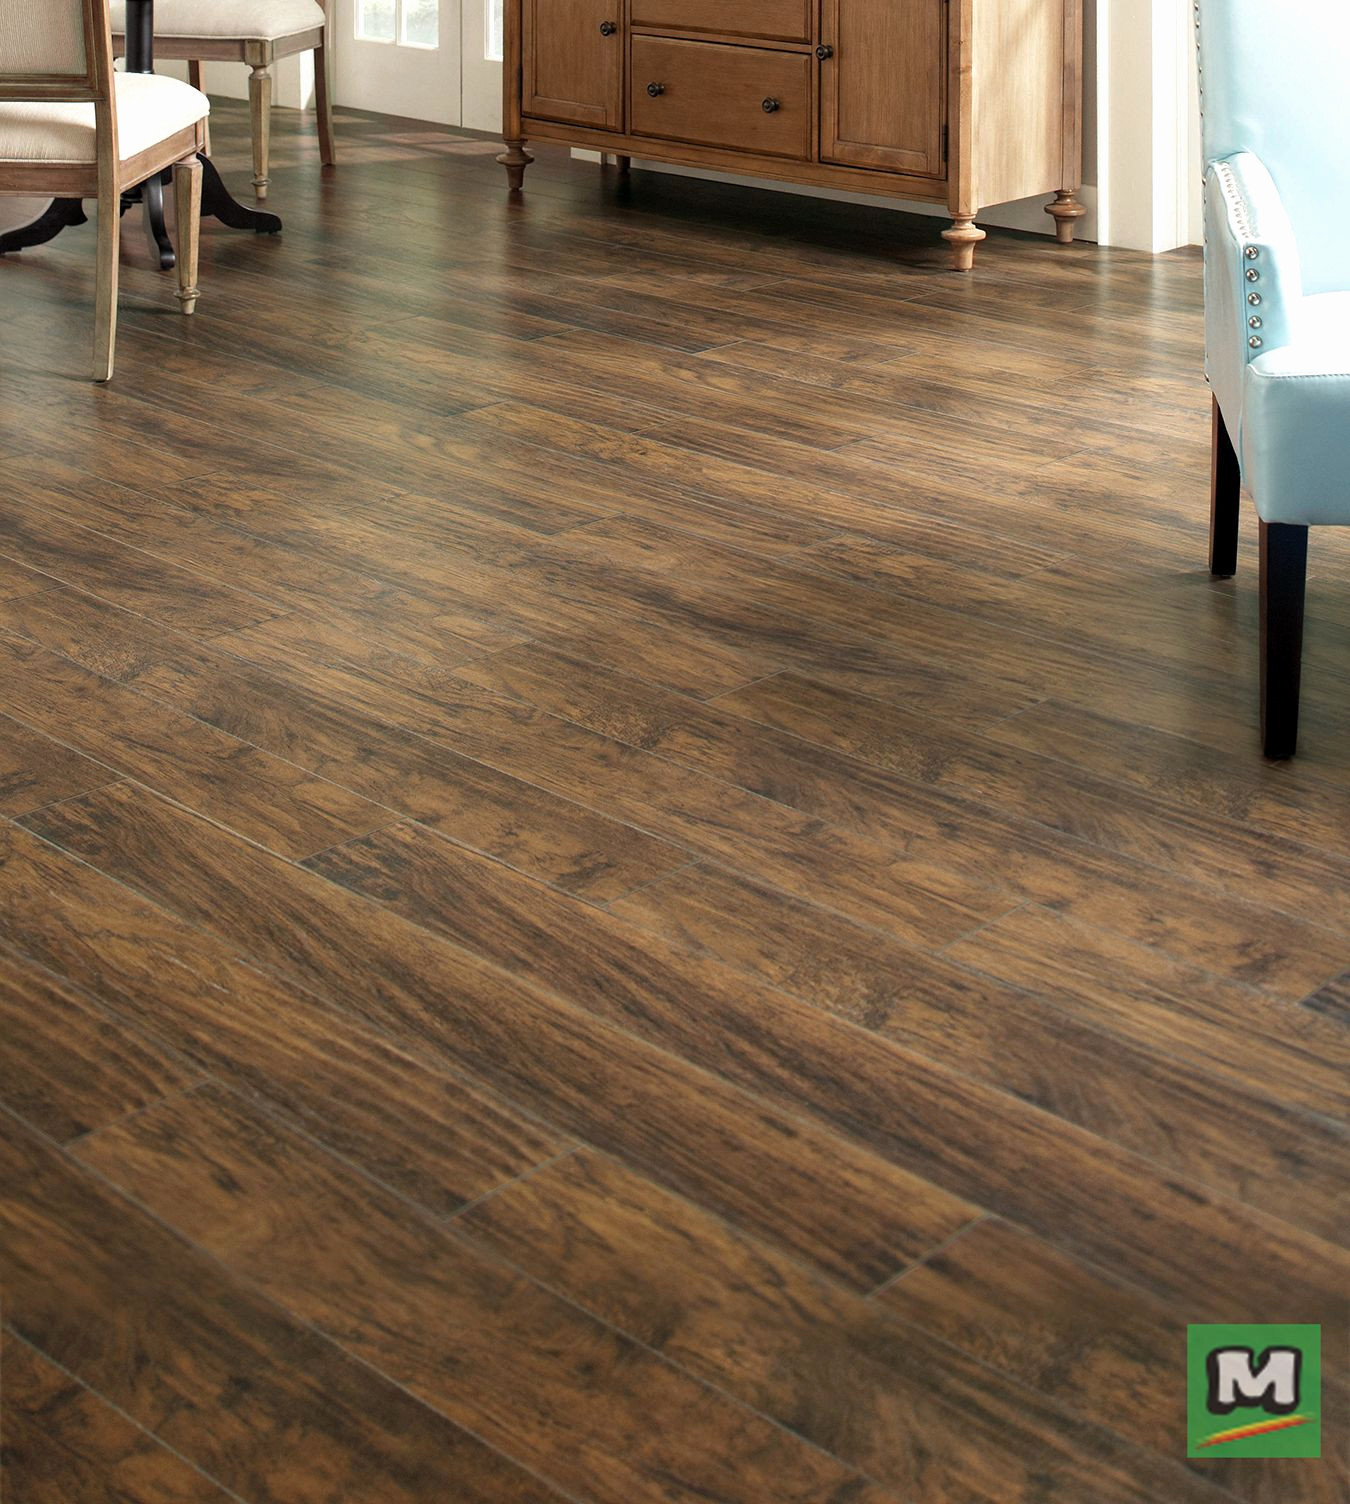 12 Spectacular Hardwood Flooring Reviews 2024 free download hardwood flooring reviews of laminate flooring cost calculator how much flooring do i need regarding laminate flooring cost calculator installing laminate wood flooring how much would it cos